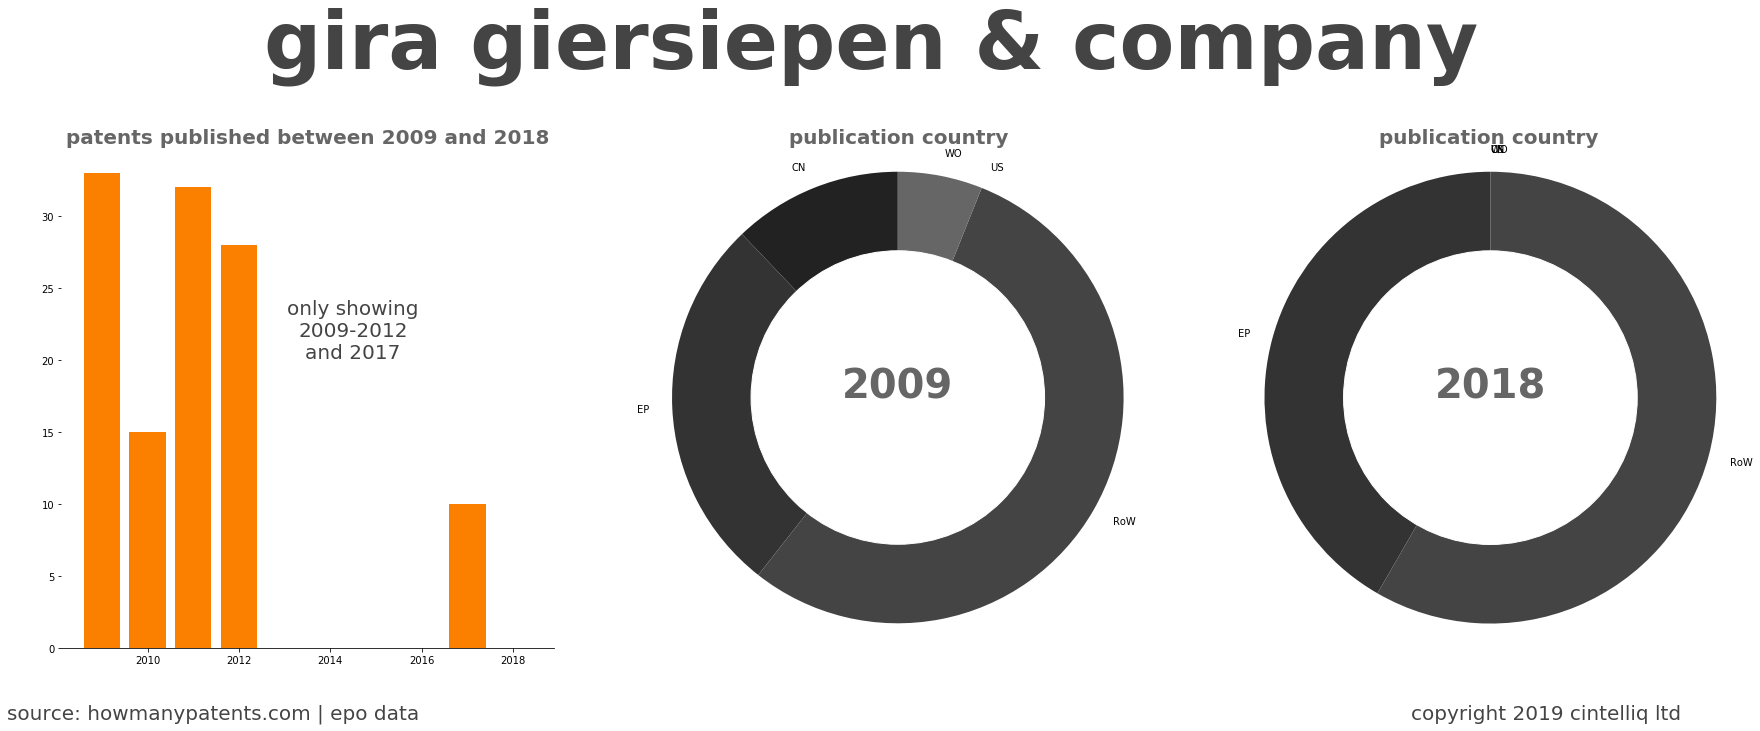 summary of patents for Gira Giersiepen & Company